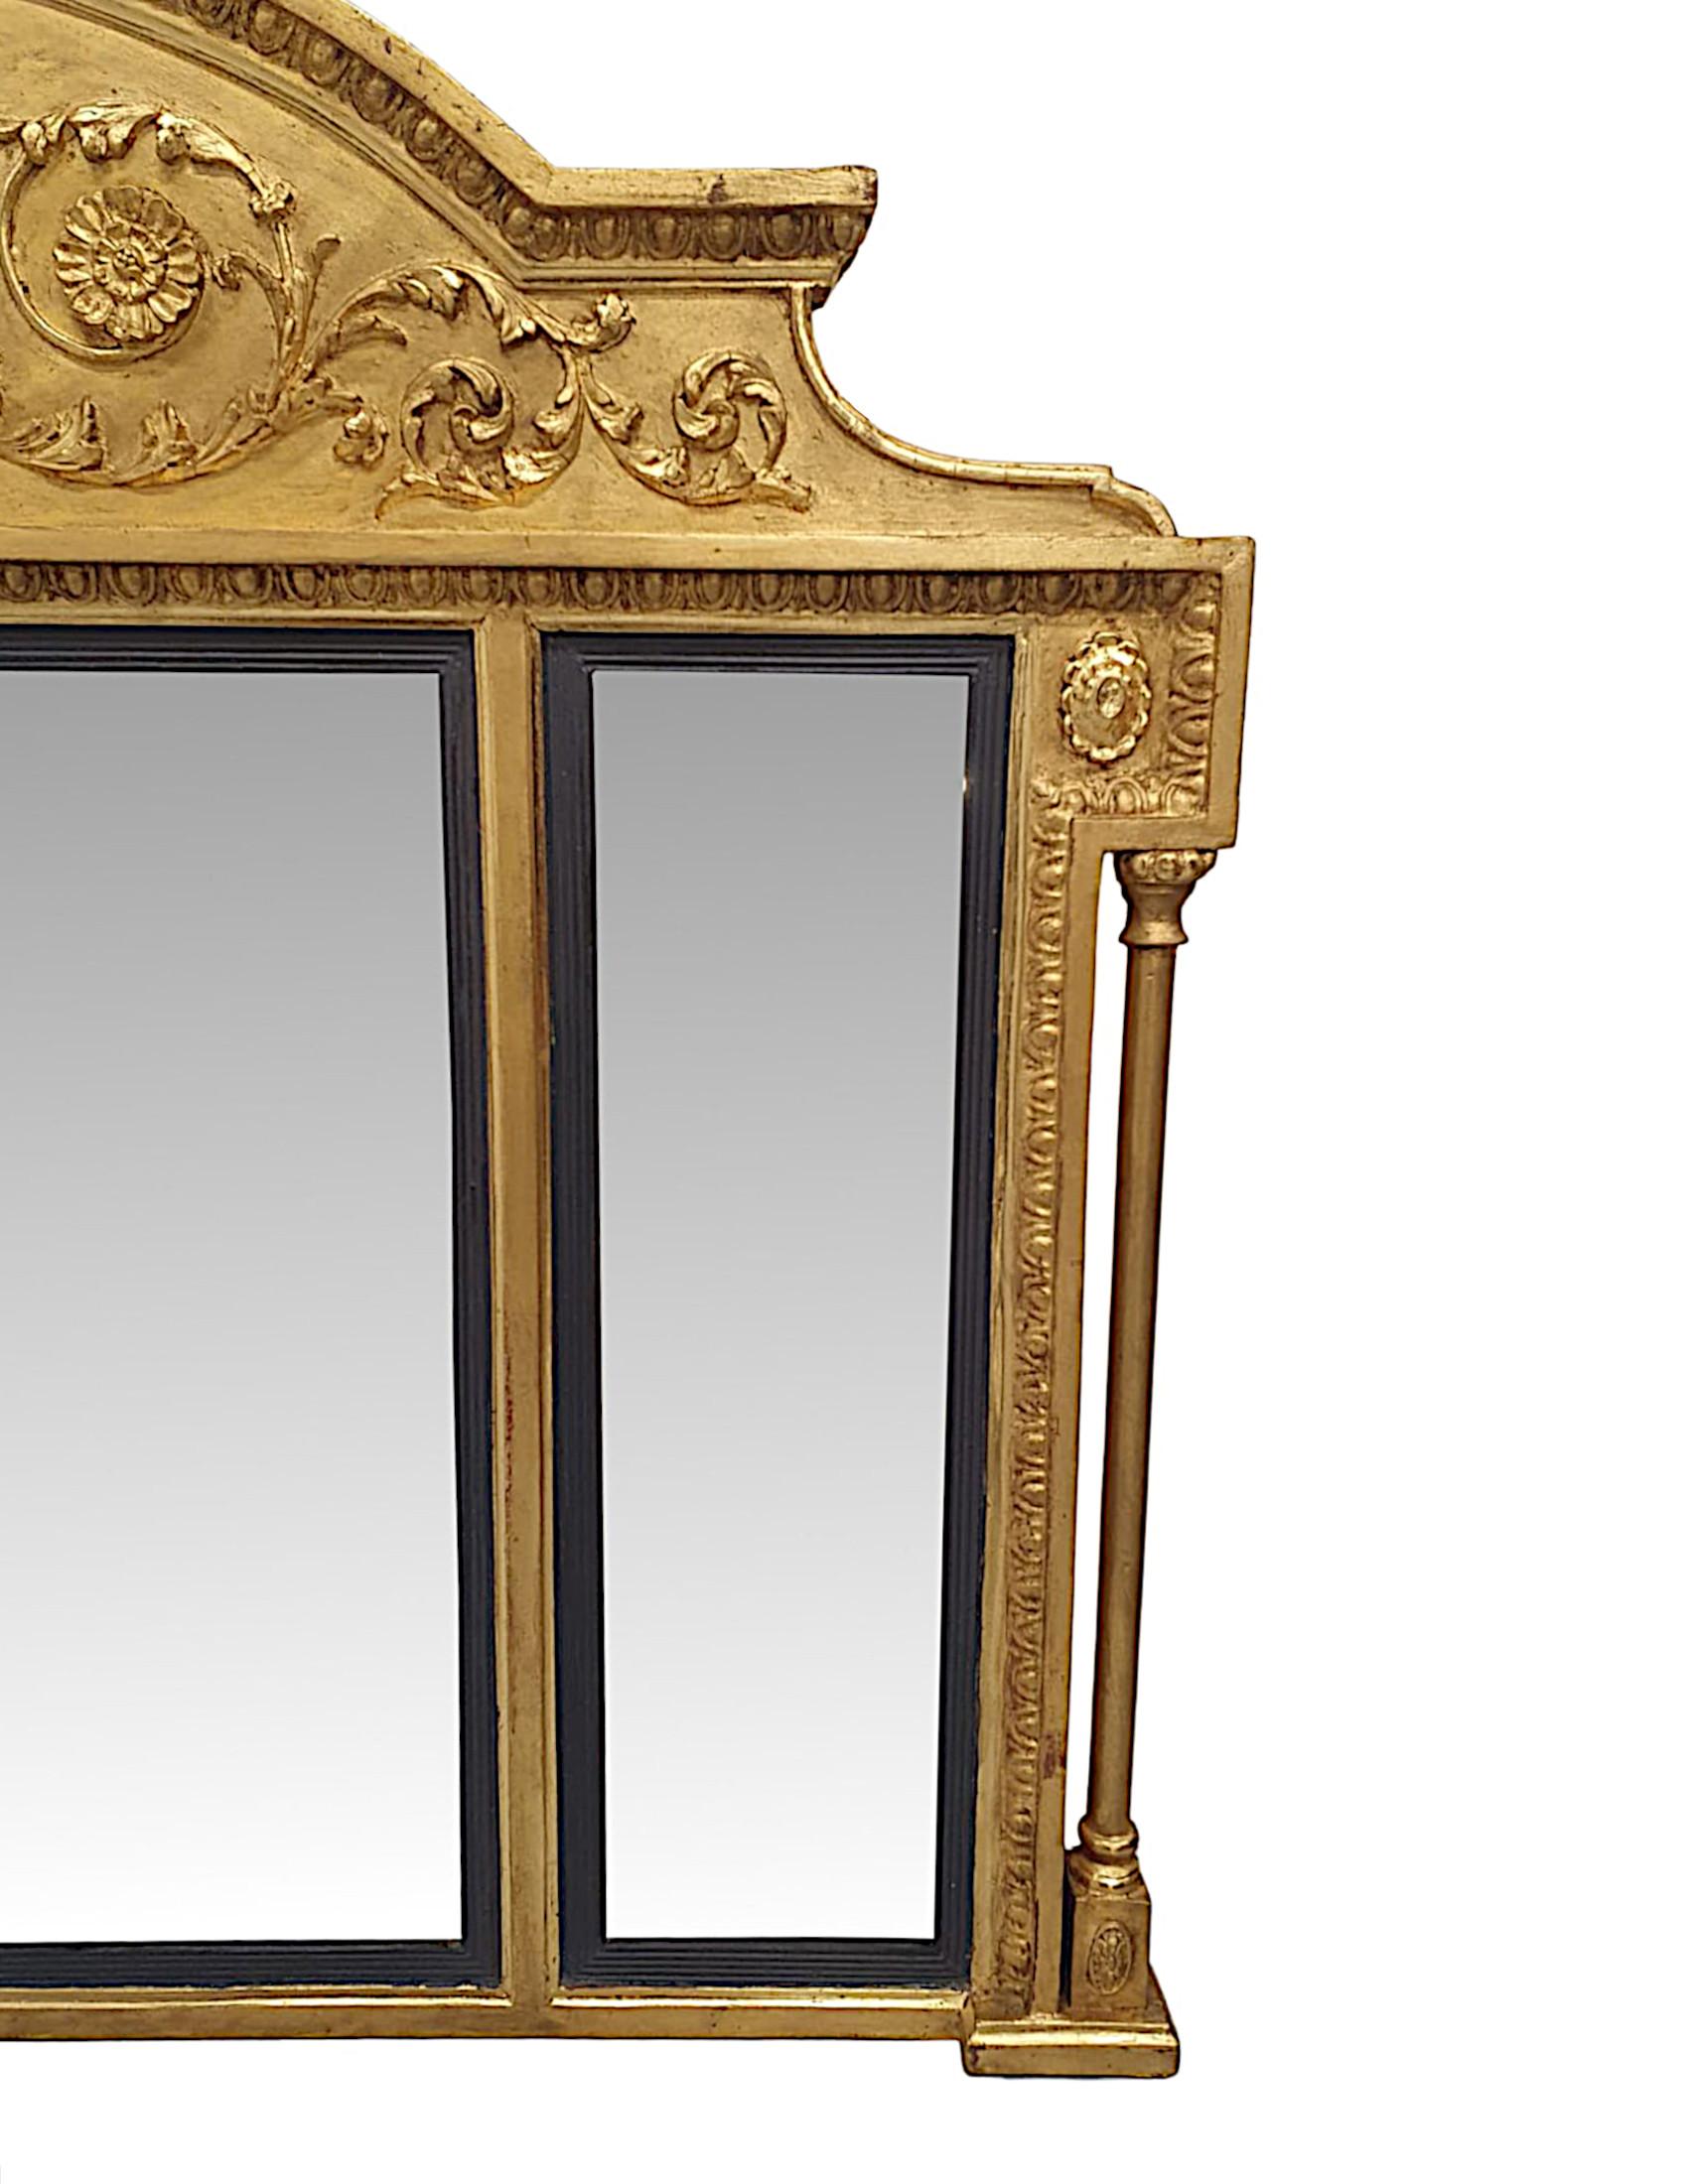 English A Fabulous Late 19th Century Adams Design Giltwood Compartmental Mirror For Sale